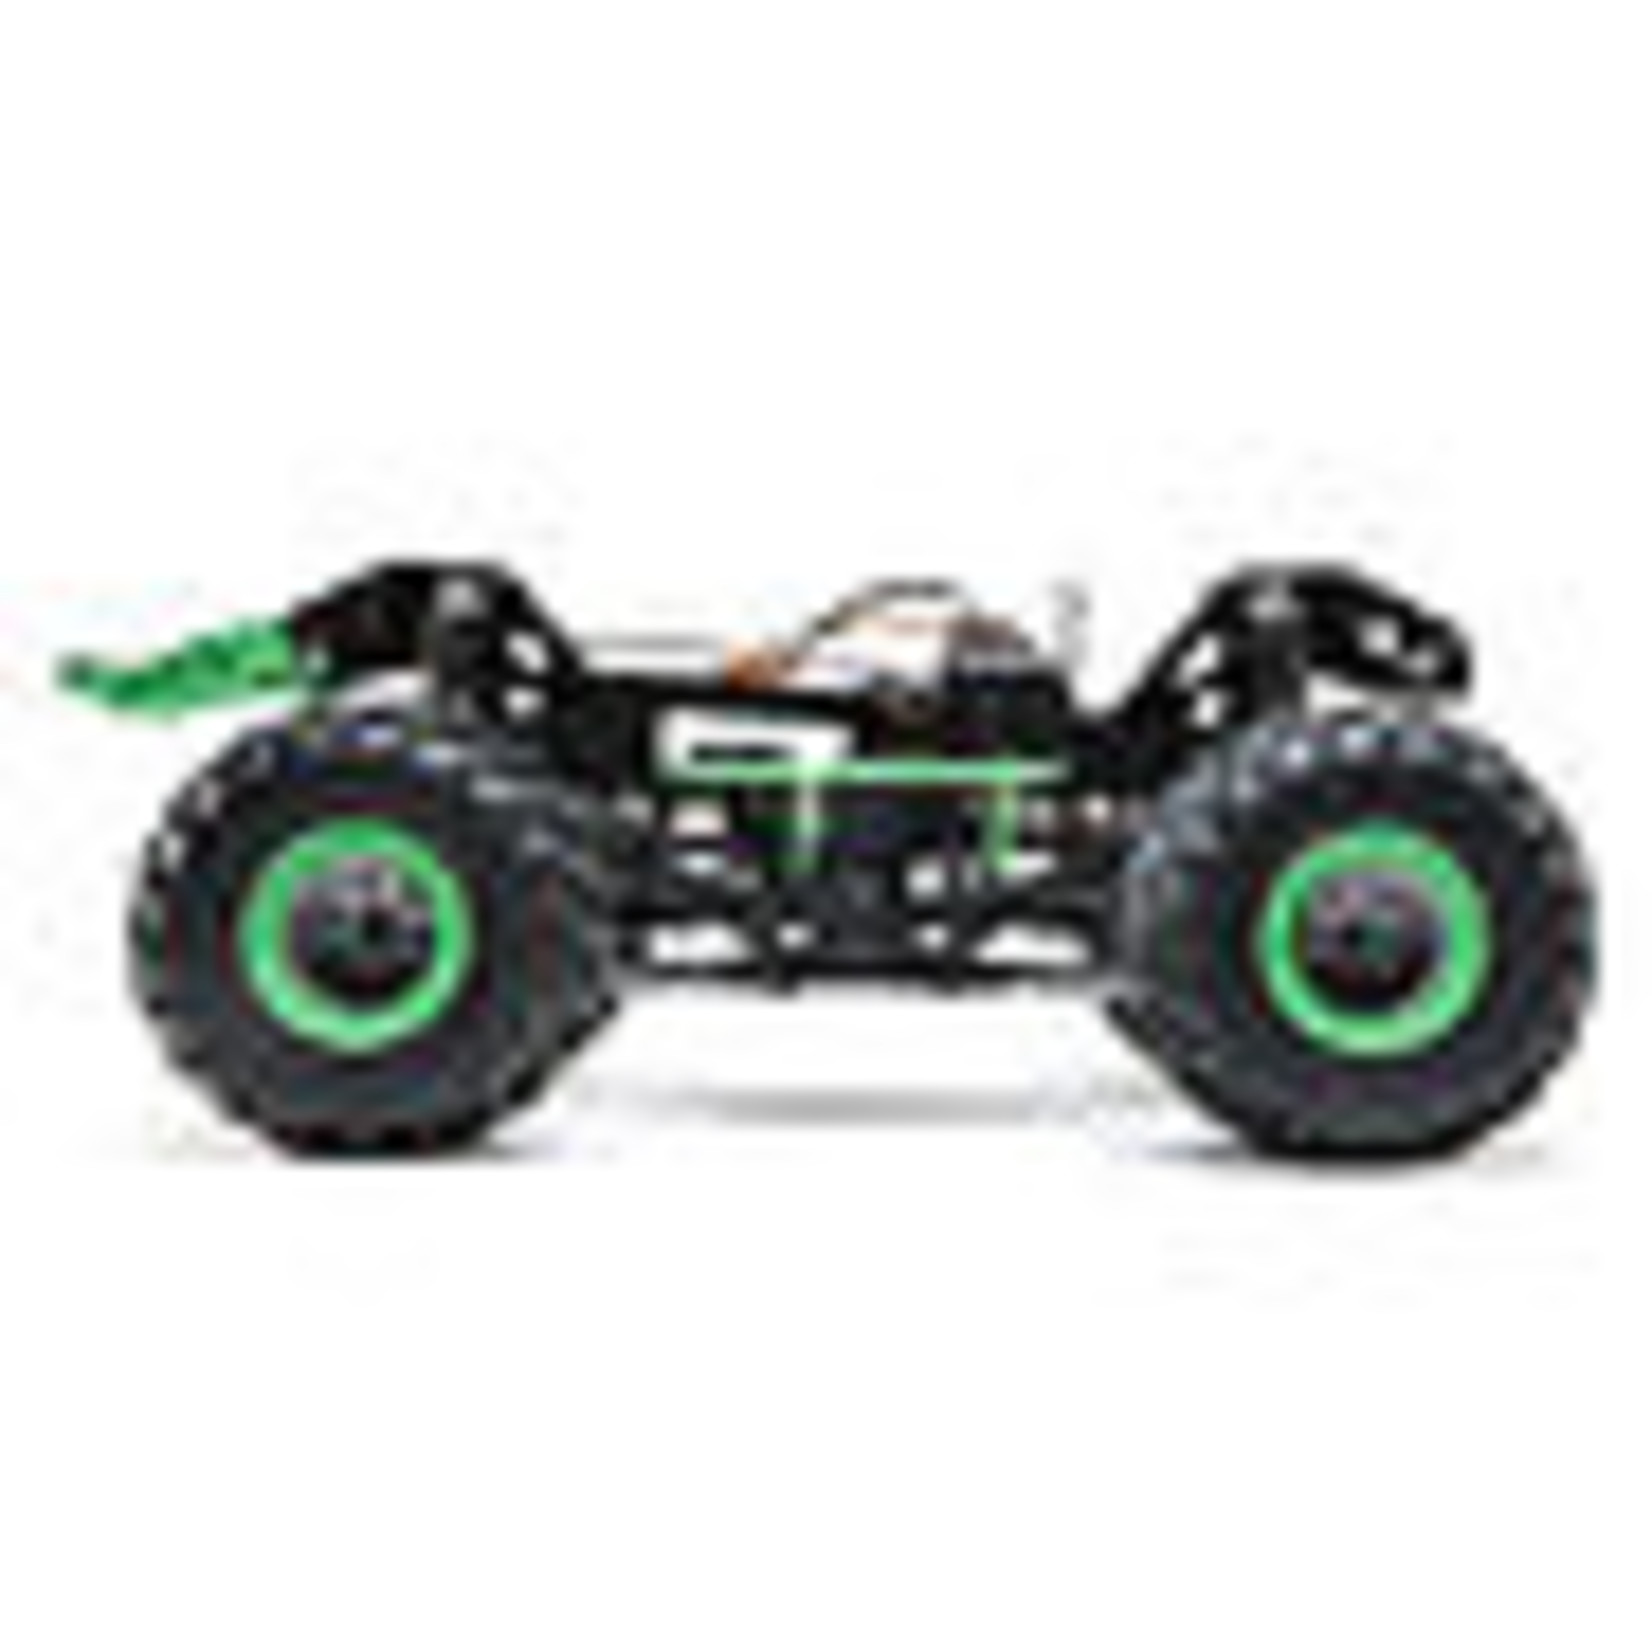 Losi LMT:4wd Solid Axle Monster Truck, Grave Digger:RTR